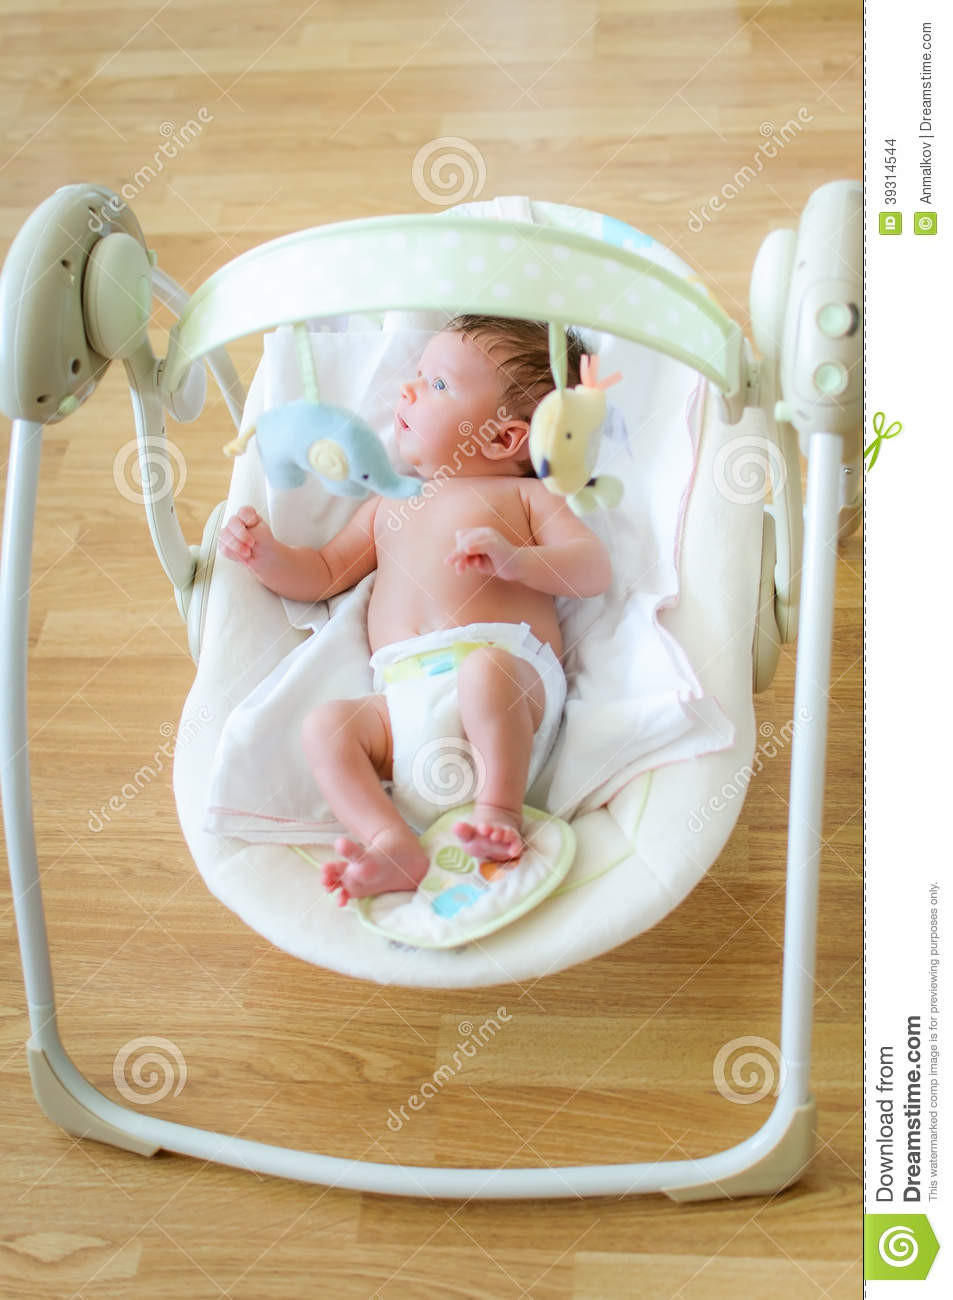 Best ideas about Sit Up Baby Swing
. Save or Pin Cute Newborn Baby Boy Sitting In Electrical Swing Stock Now.